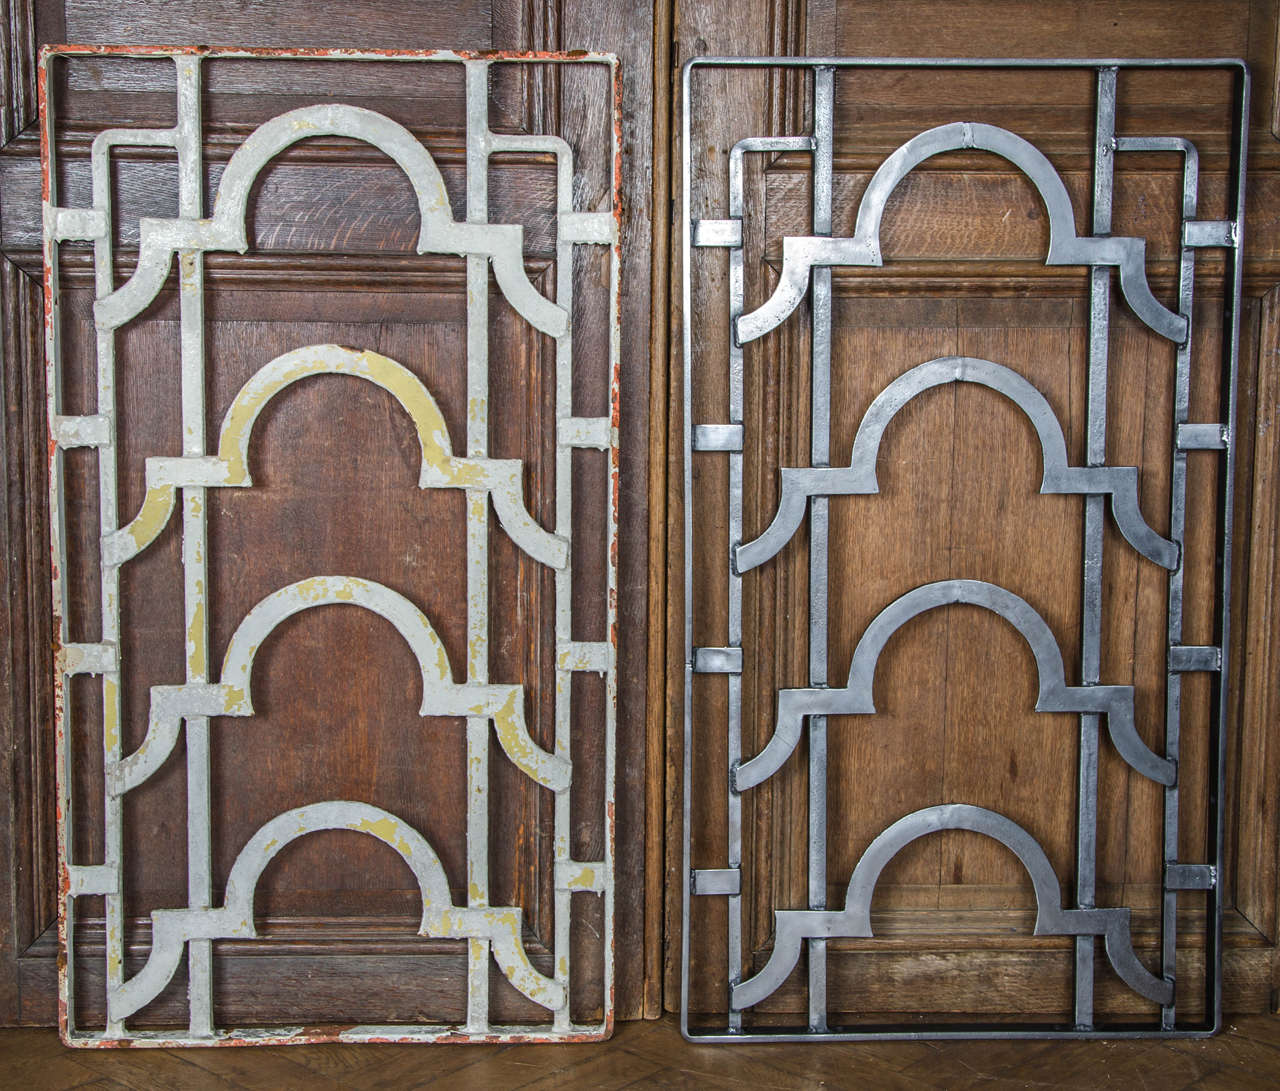 We have a set of these distinctively Art Deco grills in cast iron. The grills can be left as they are (left) or stripped and polished (right). They were reclaimed from a mansion block in North London.

They are priced at £250 each as they are or